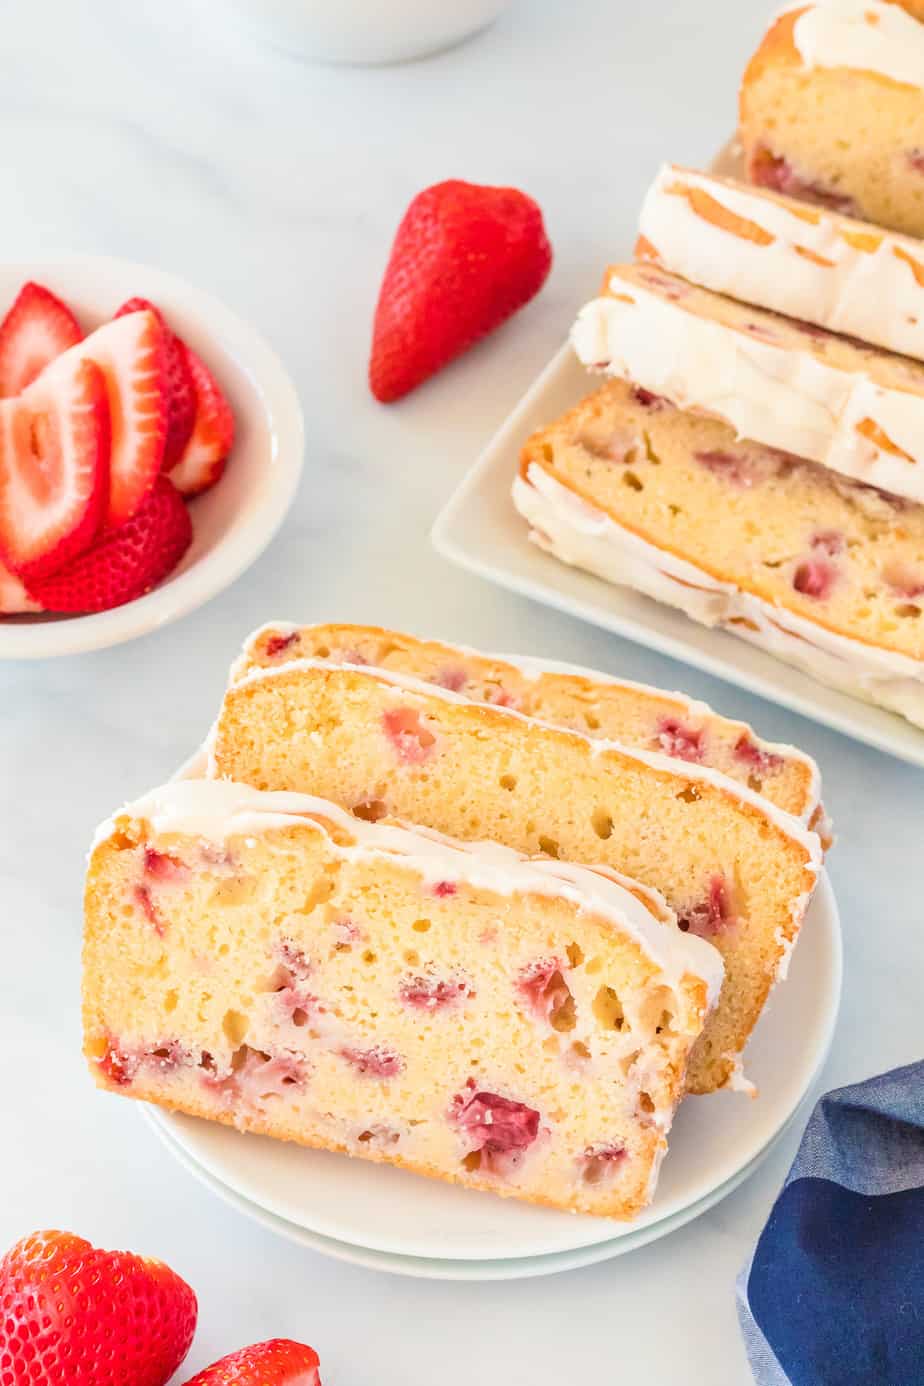 Two slices of strawberry bread with glaze on a plate next to a platter of quick bread and a bowl of fresh strawberries